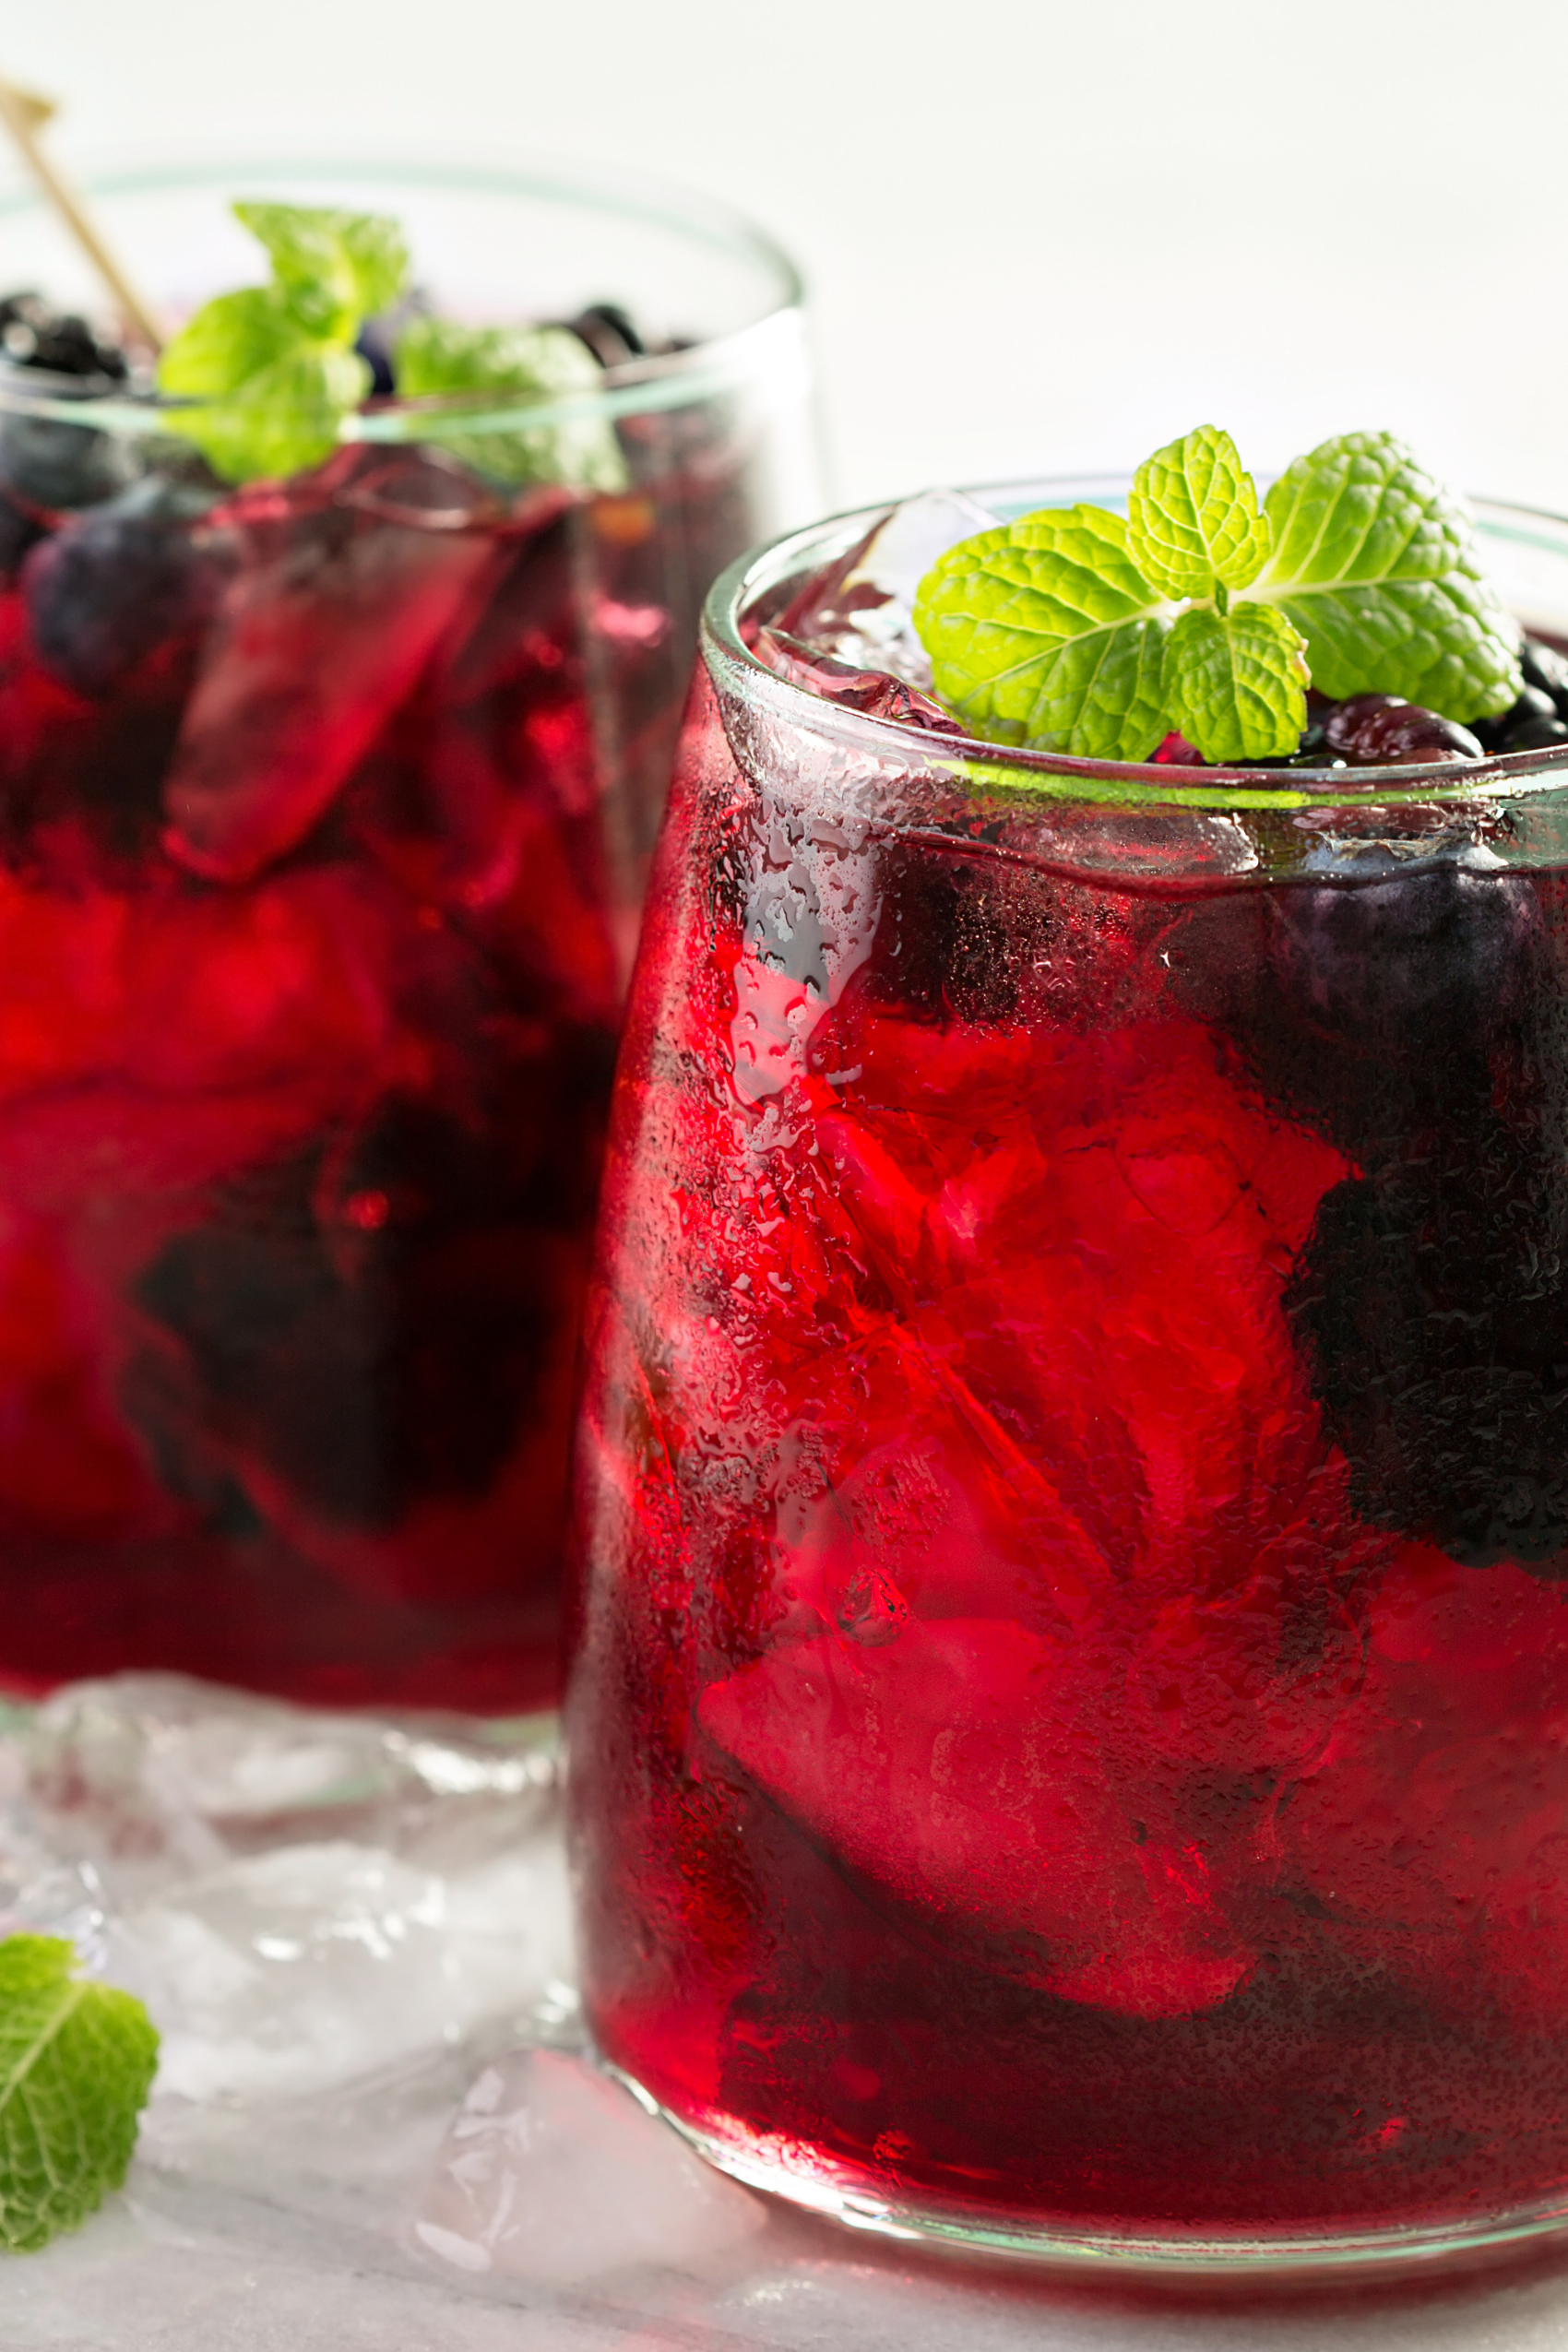 Two glass cups back left and front right filled with a bright red cold drink with berries topped with mint leaves.